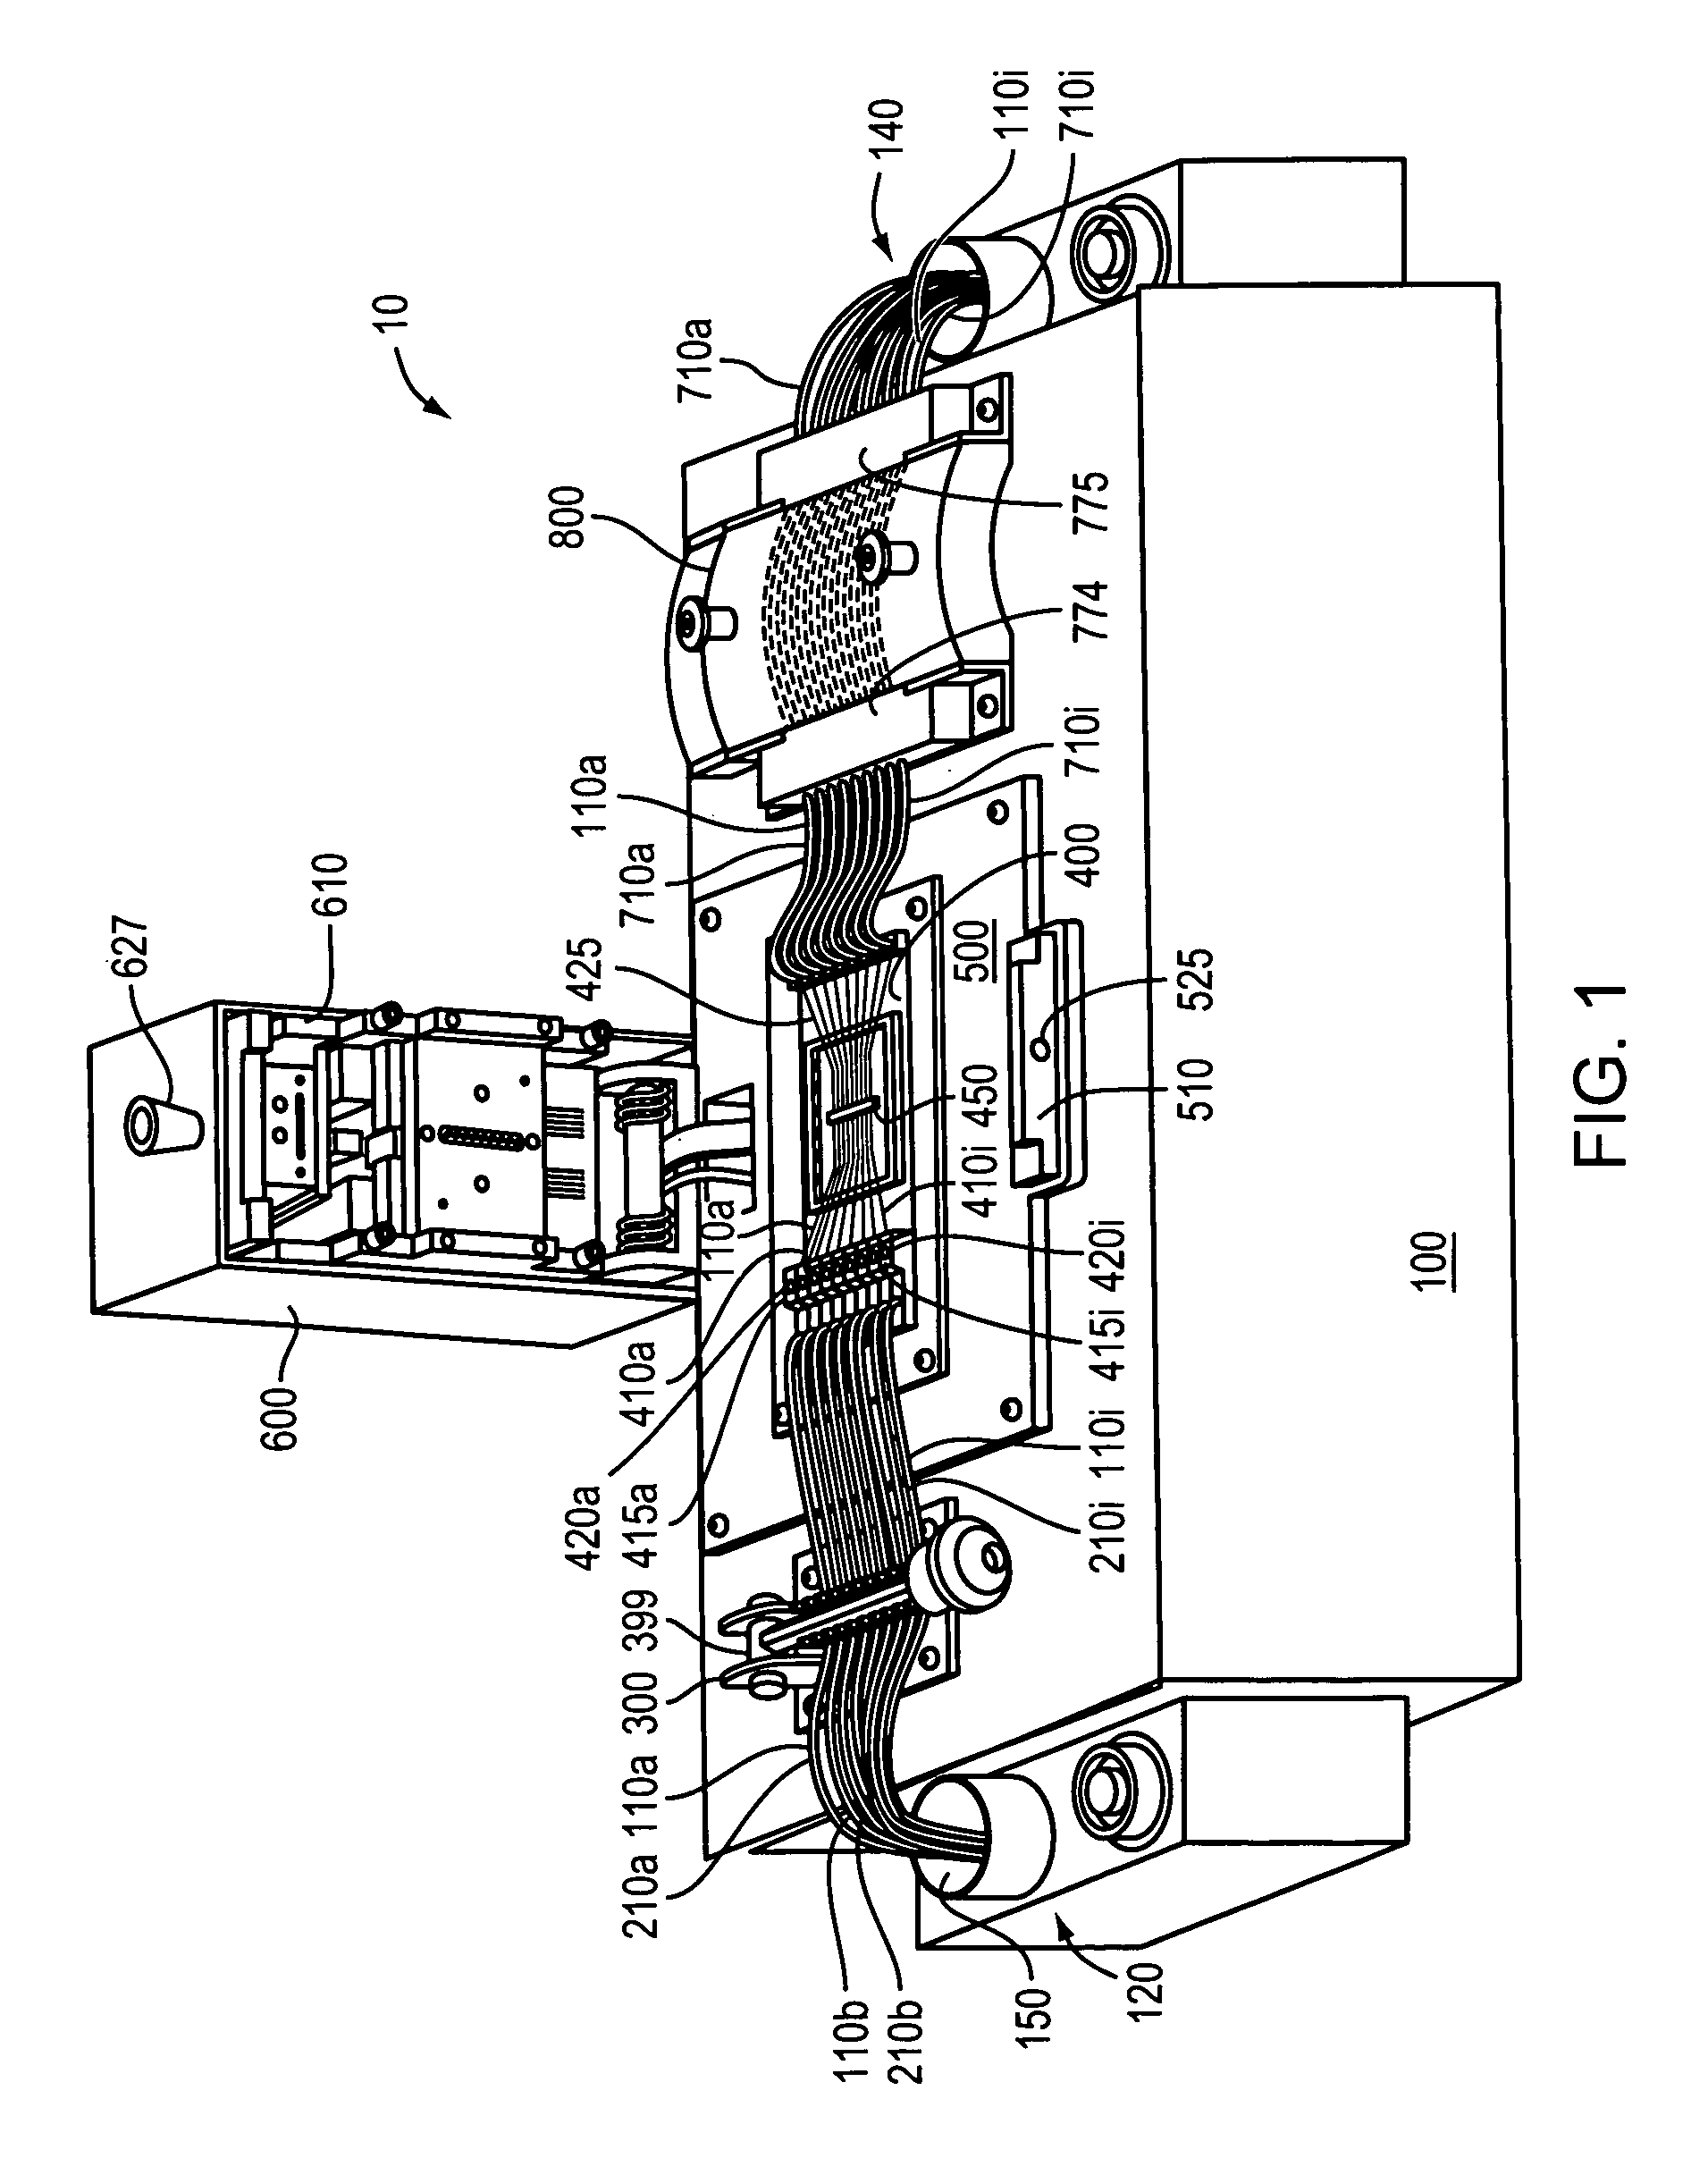 Apparatus for analyte processing